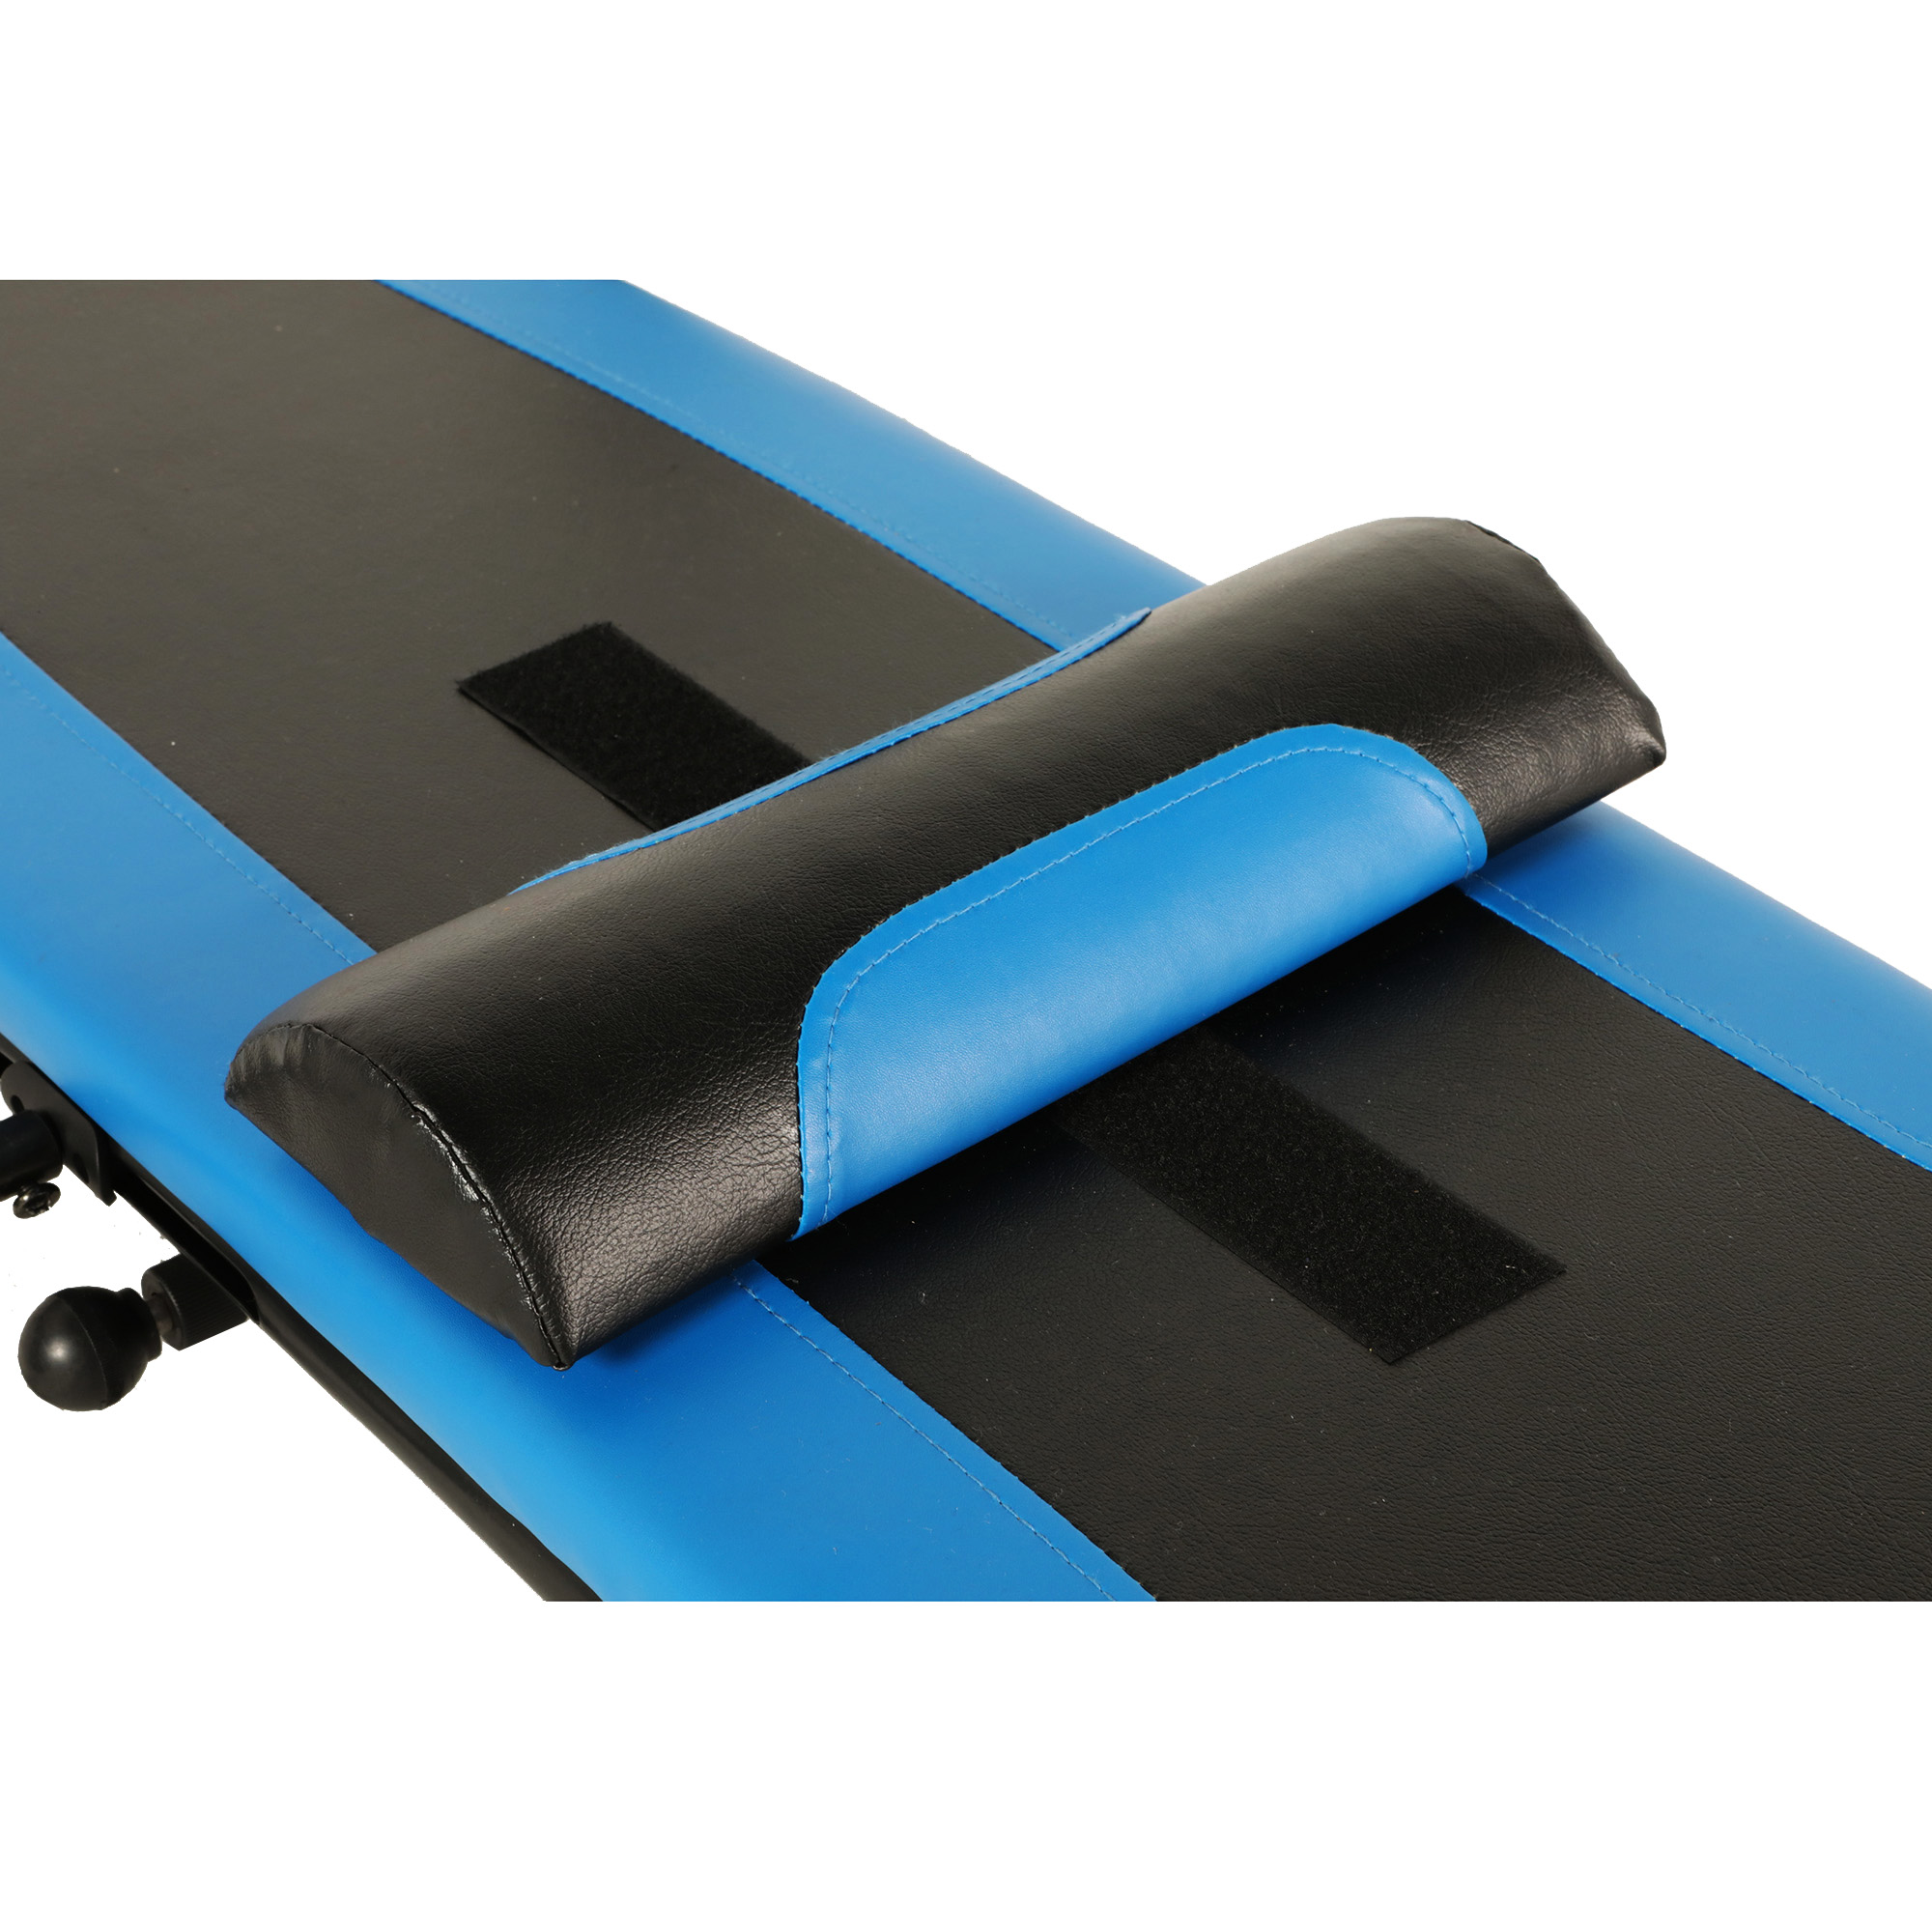 Exerpeutic 100 Back Stretch Traction Table Inversion Alternative with 300 Lbs. Weight Capacity - image 3 of 6